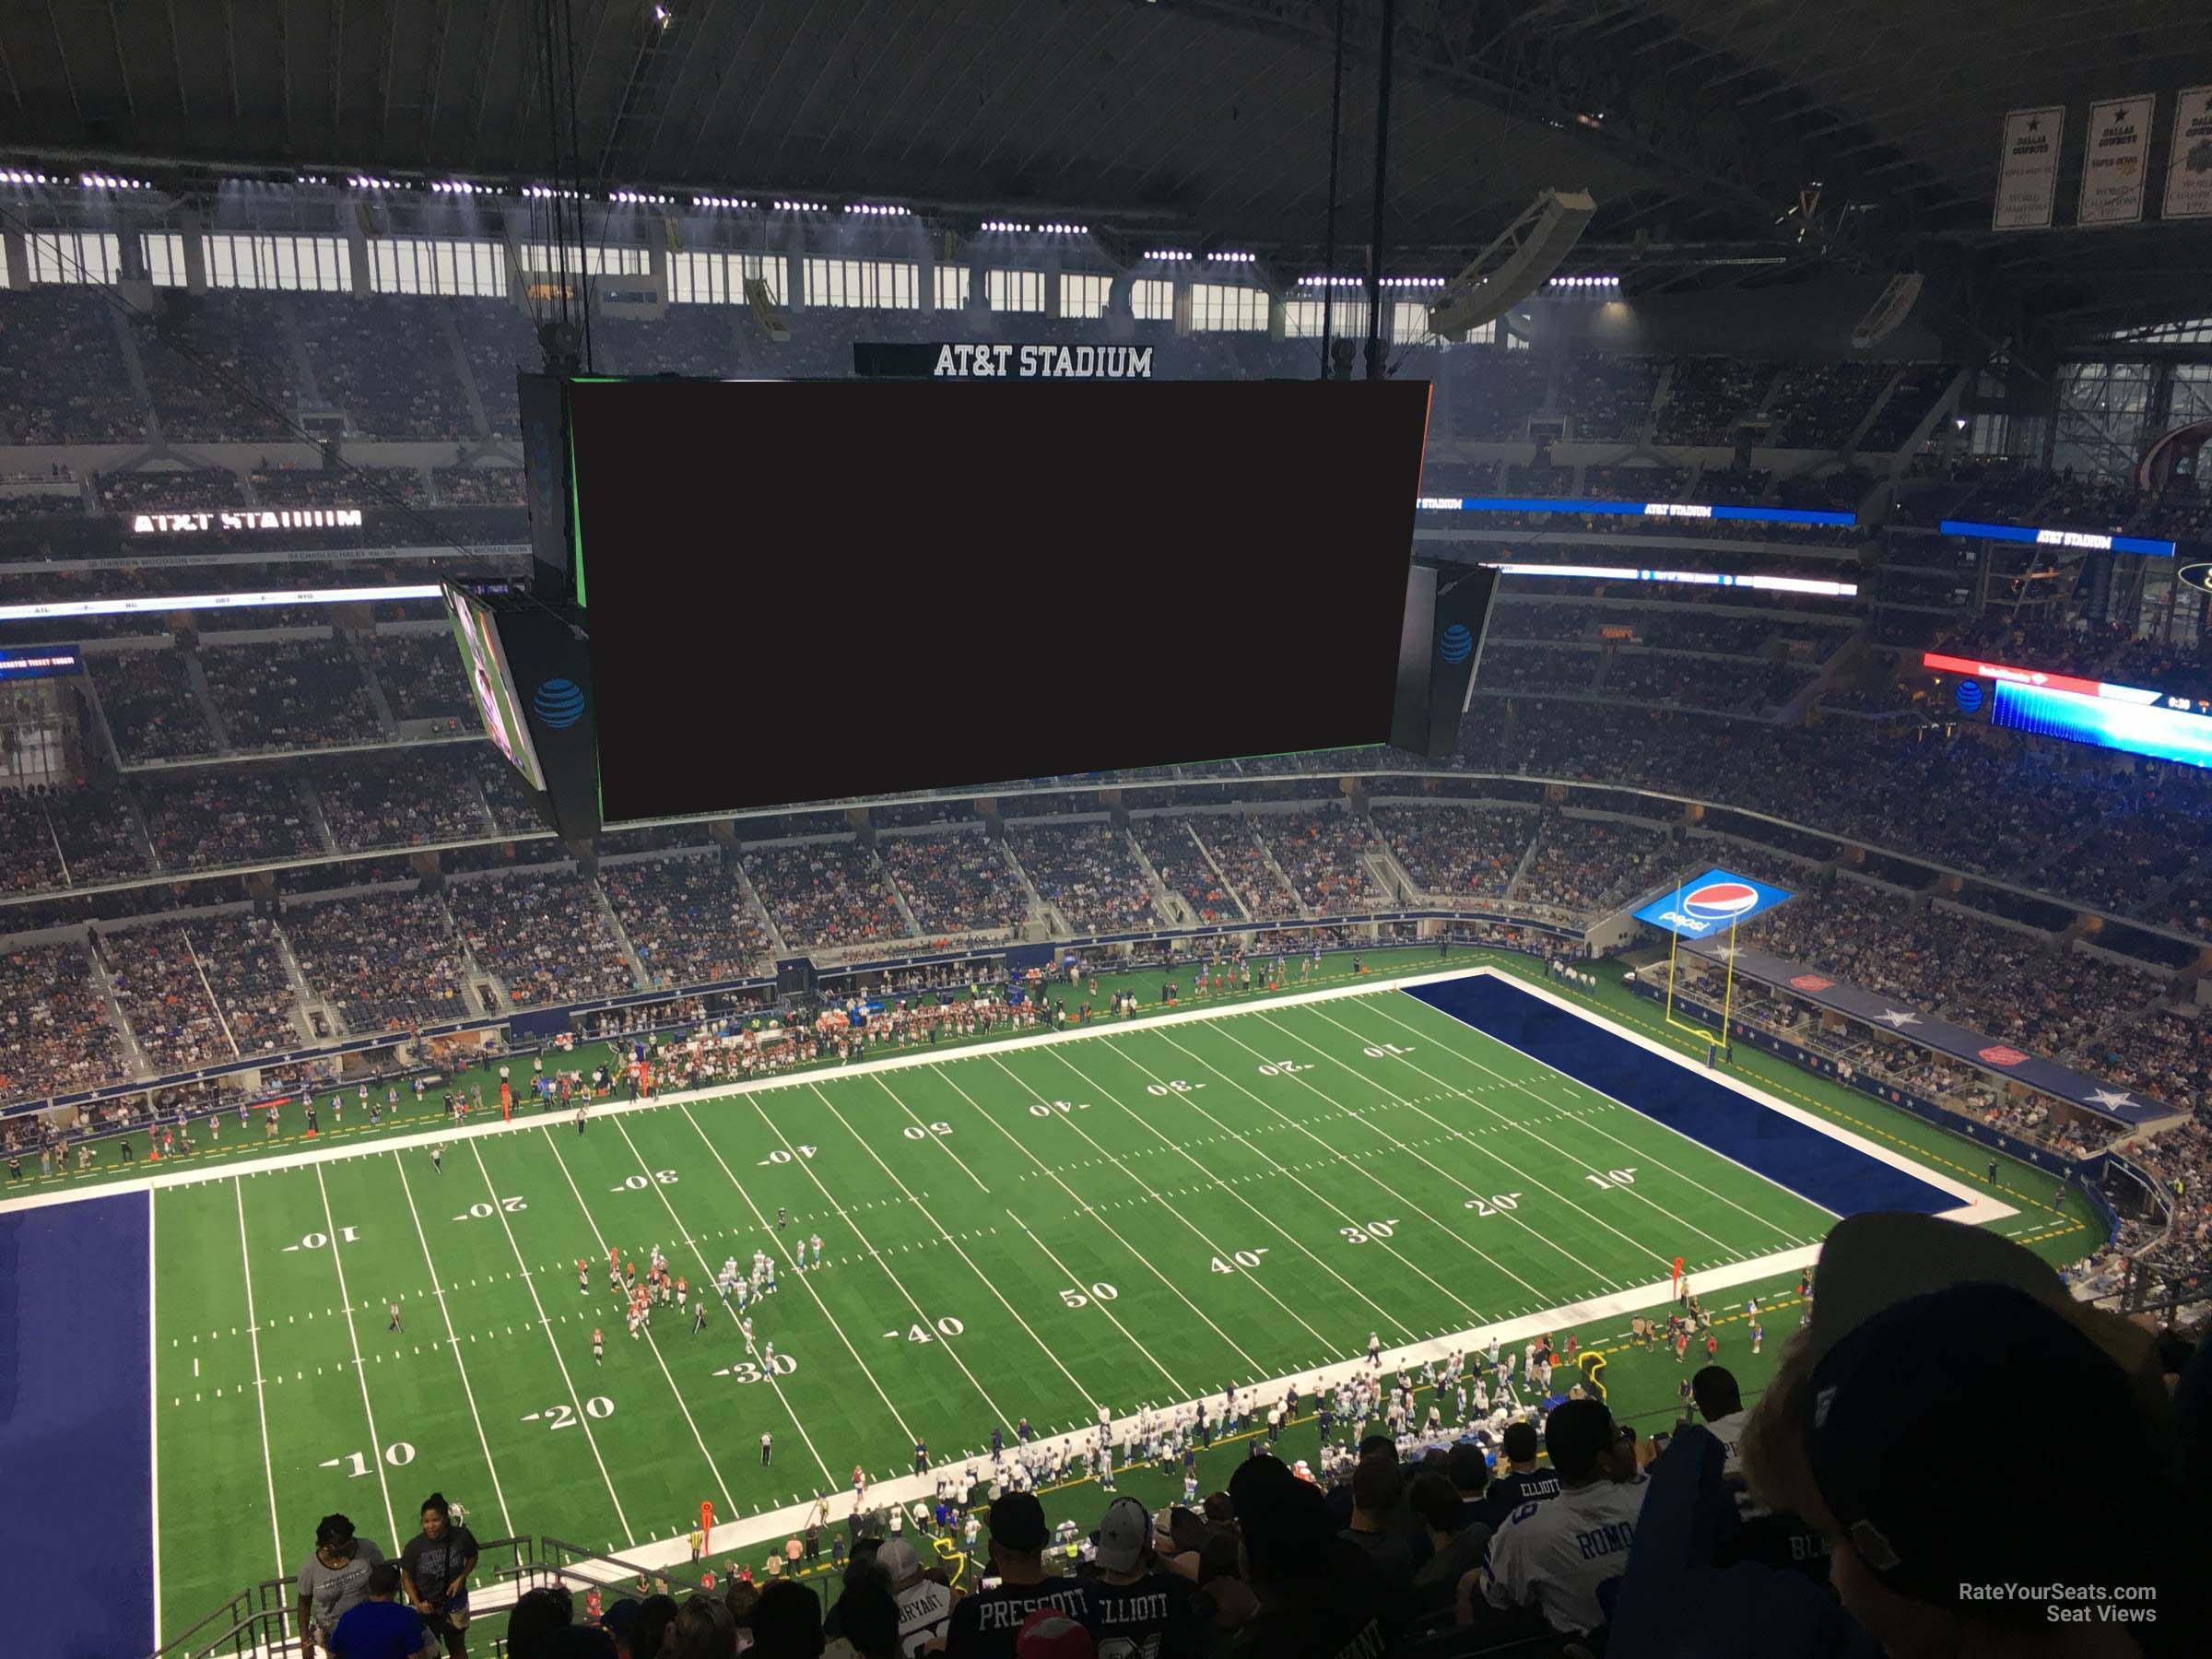 section 414, row 22 seat view  for football - at&t stadium (cowboys stadium)